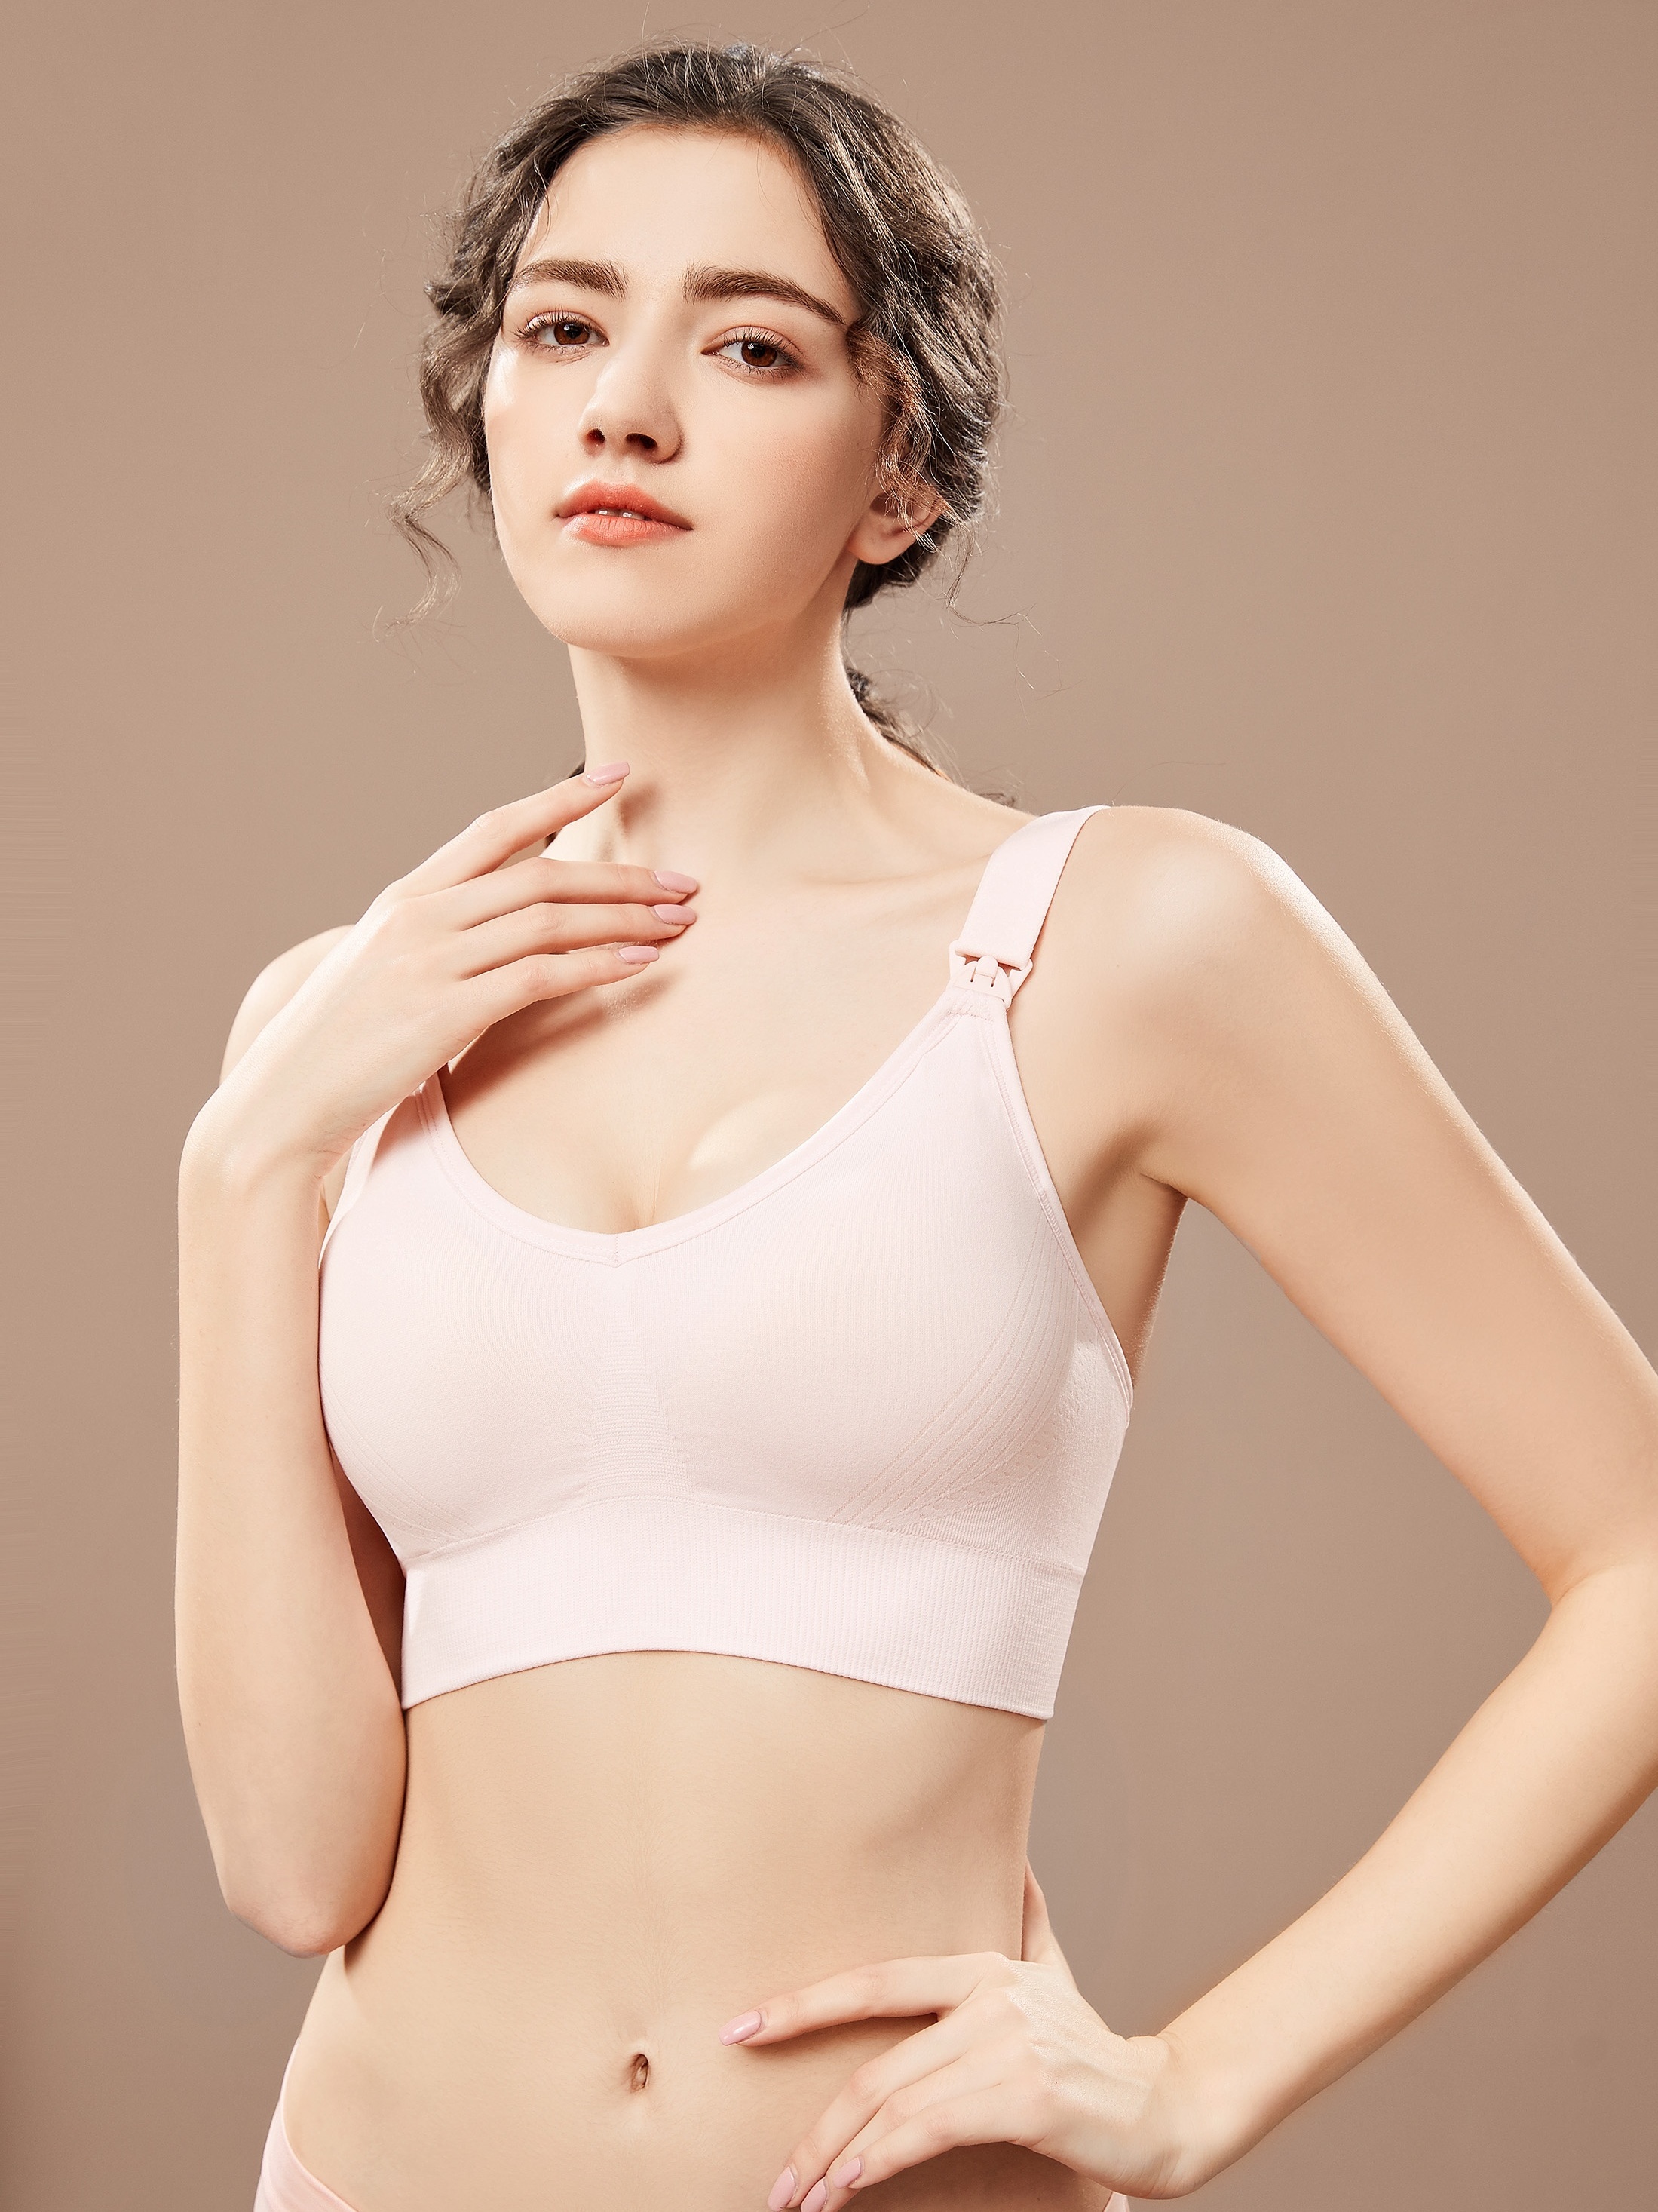 Comfortable Bras for Older Women Seamless Feeling Soft Support Thin  Underwear Women's Large Breasts Show Small Jelly Strips Anti Sagging Small  Breasts